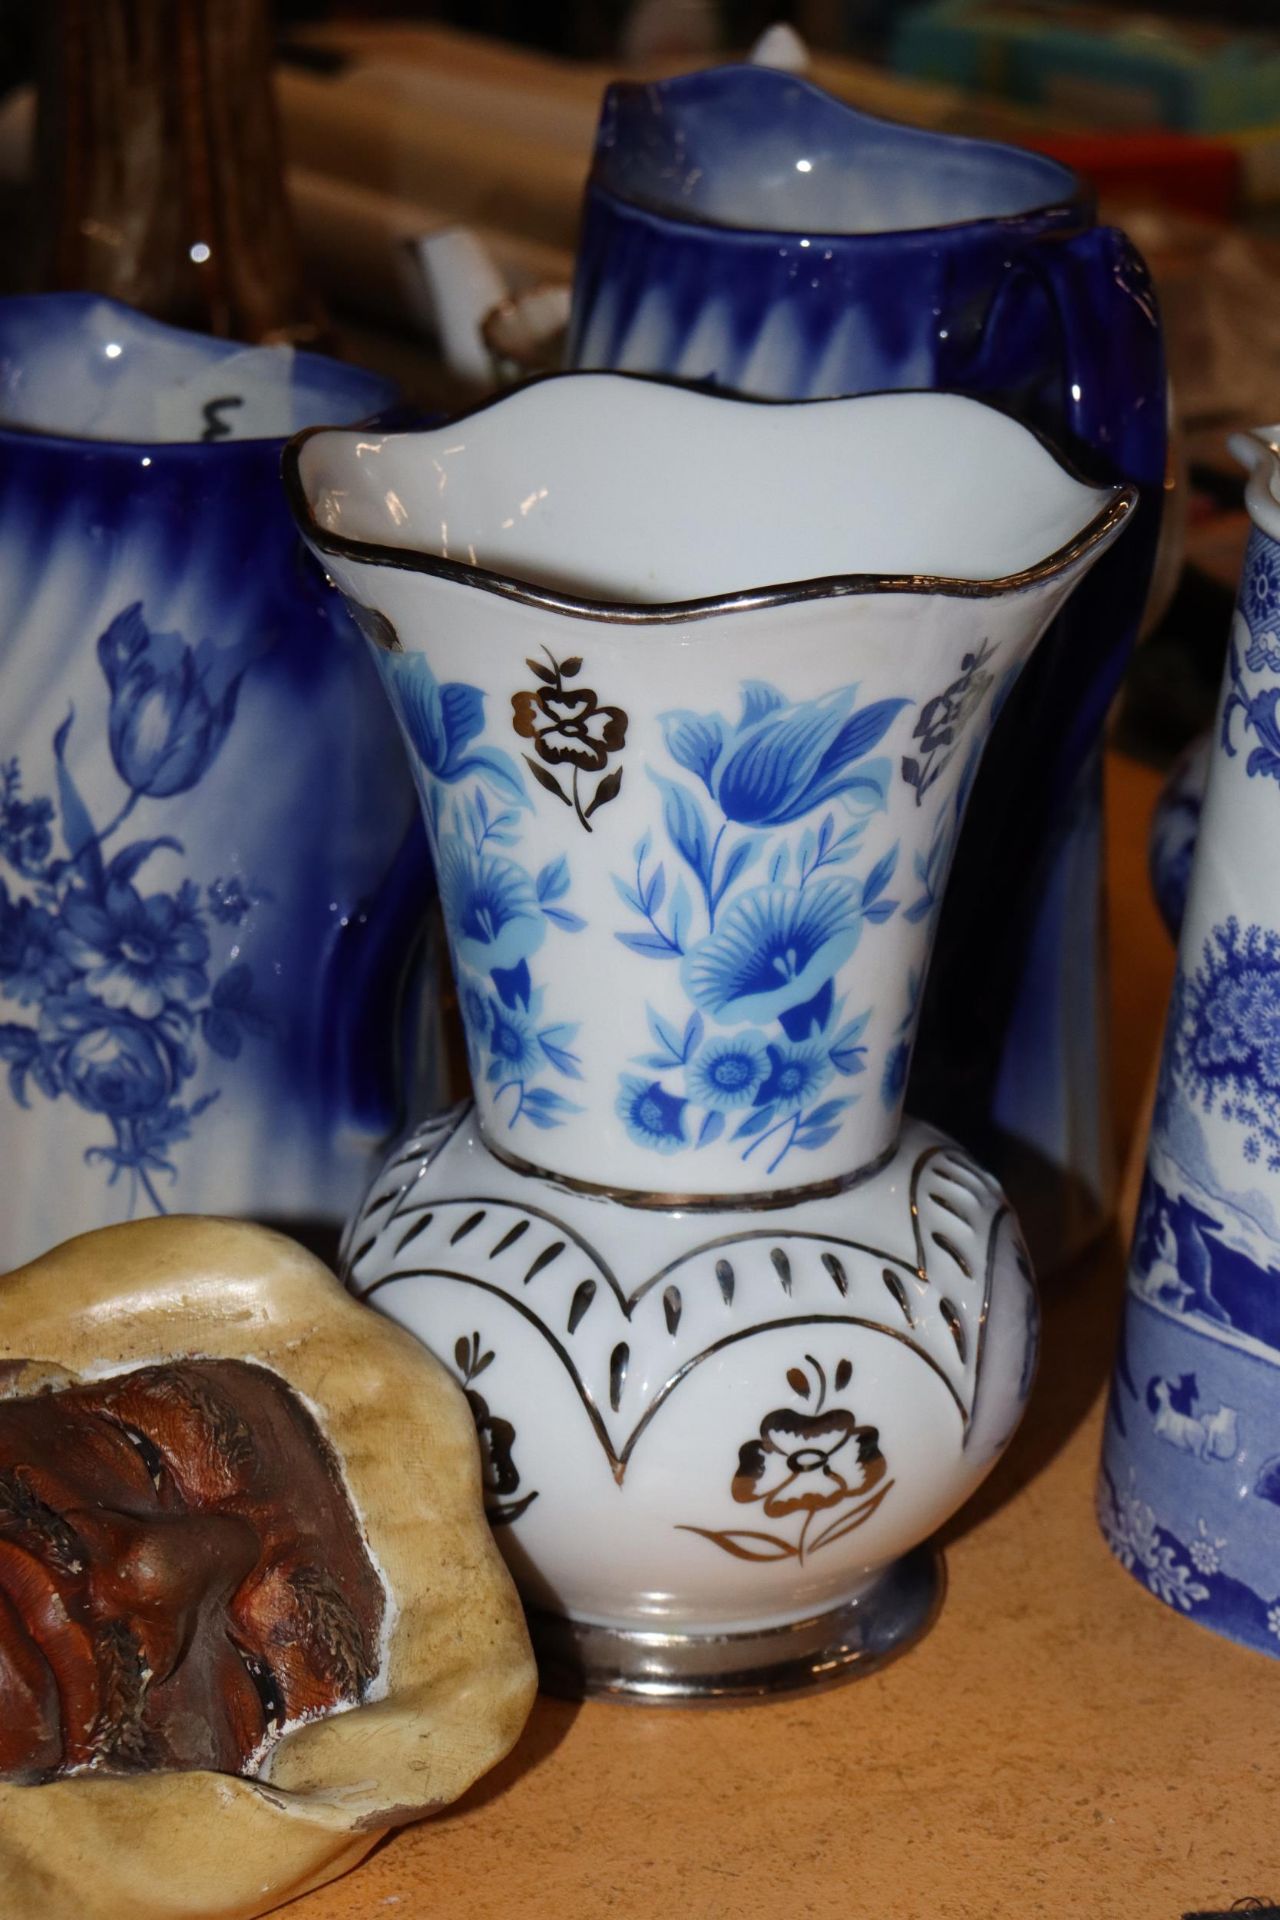 A COLLECTION OF VINTAGE BLUE AND WHITE JUGS PLUS A VASE - 5 IN TOTAL - Image 4 of 7